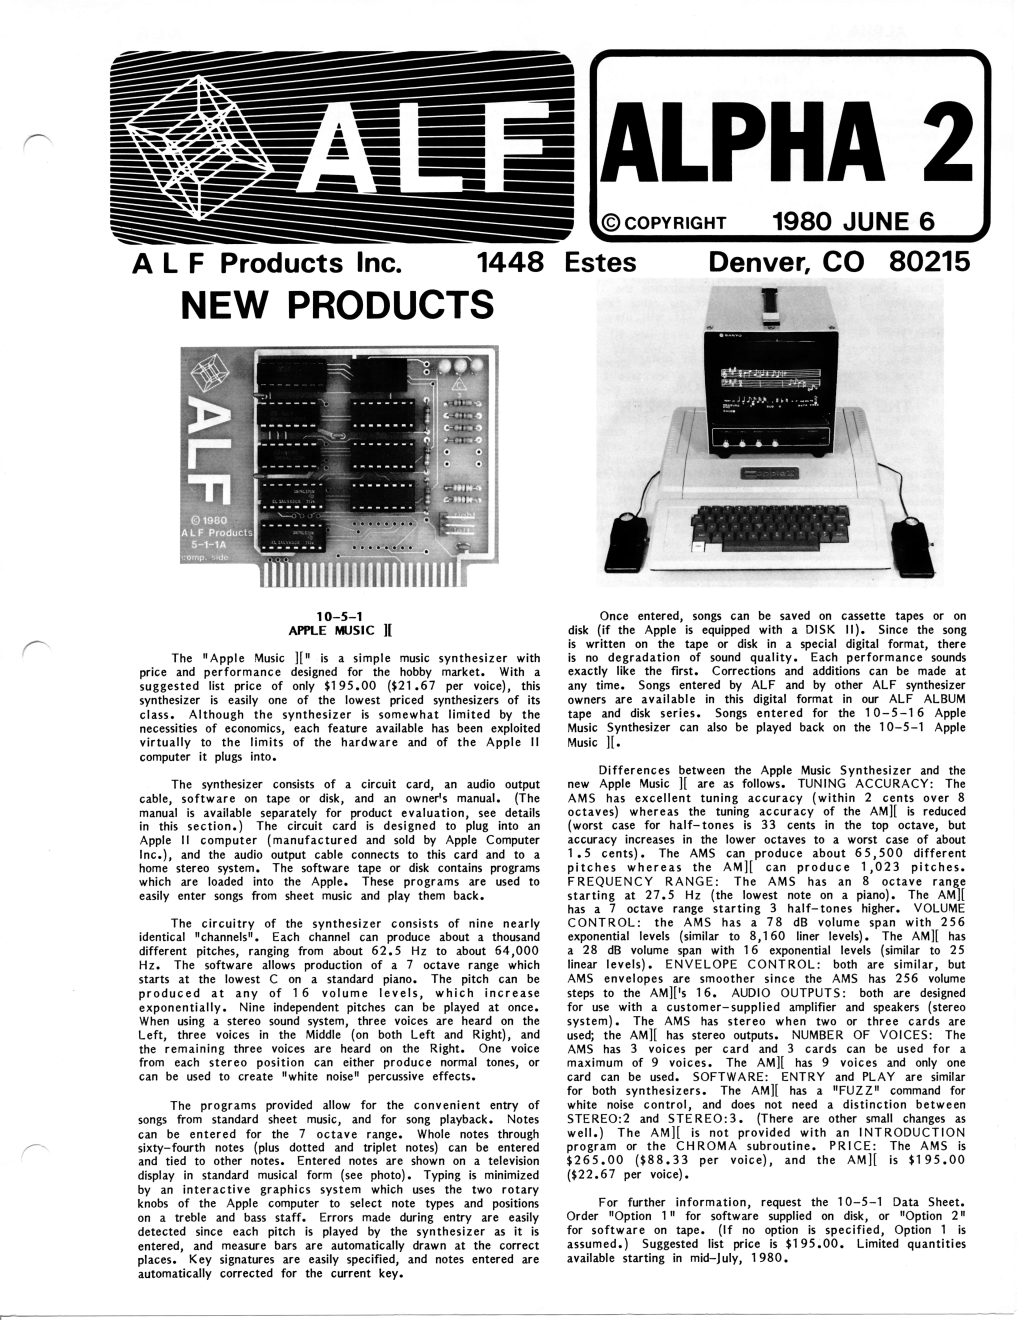 ALF ALPHA 2 3 ARTICLES (Cont.) You STEREO:2,RLLRL Assign a NOTE for DOS USERS Two Synthesizerr